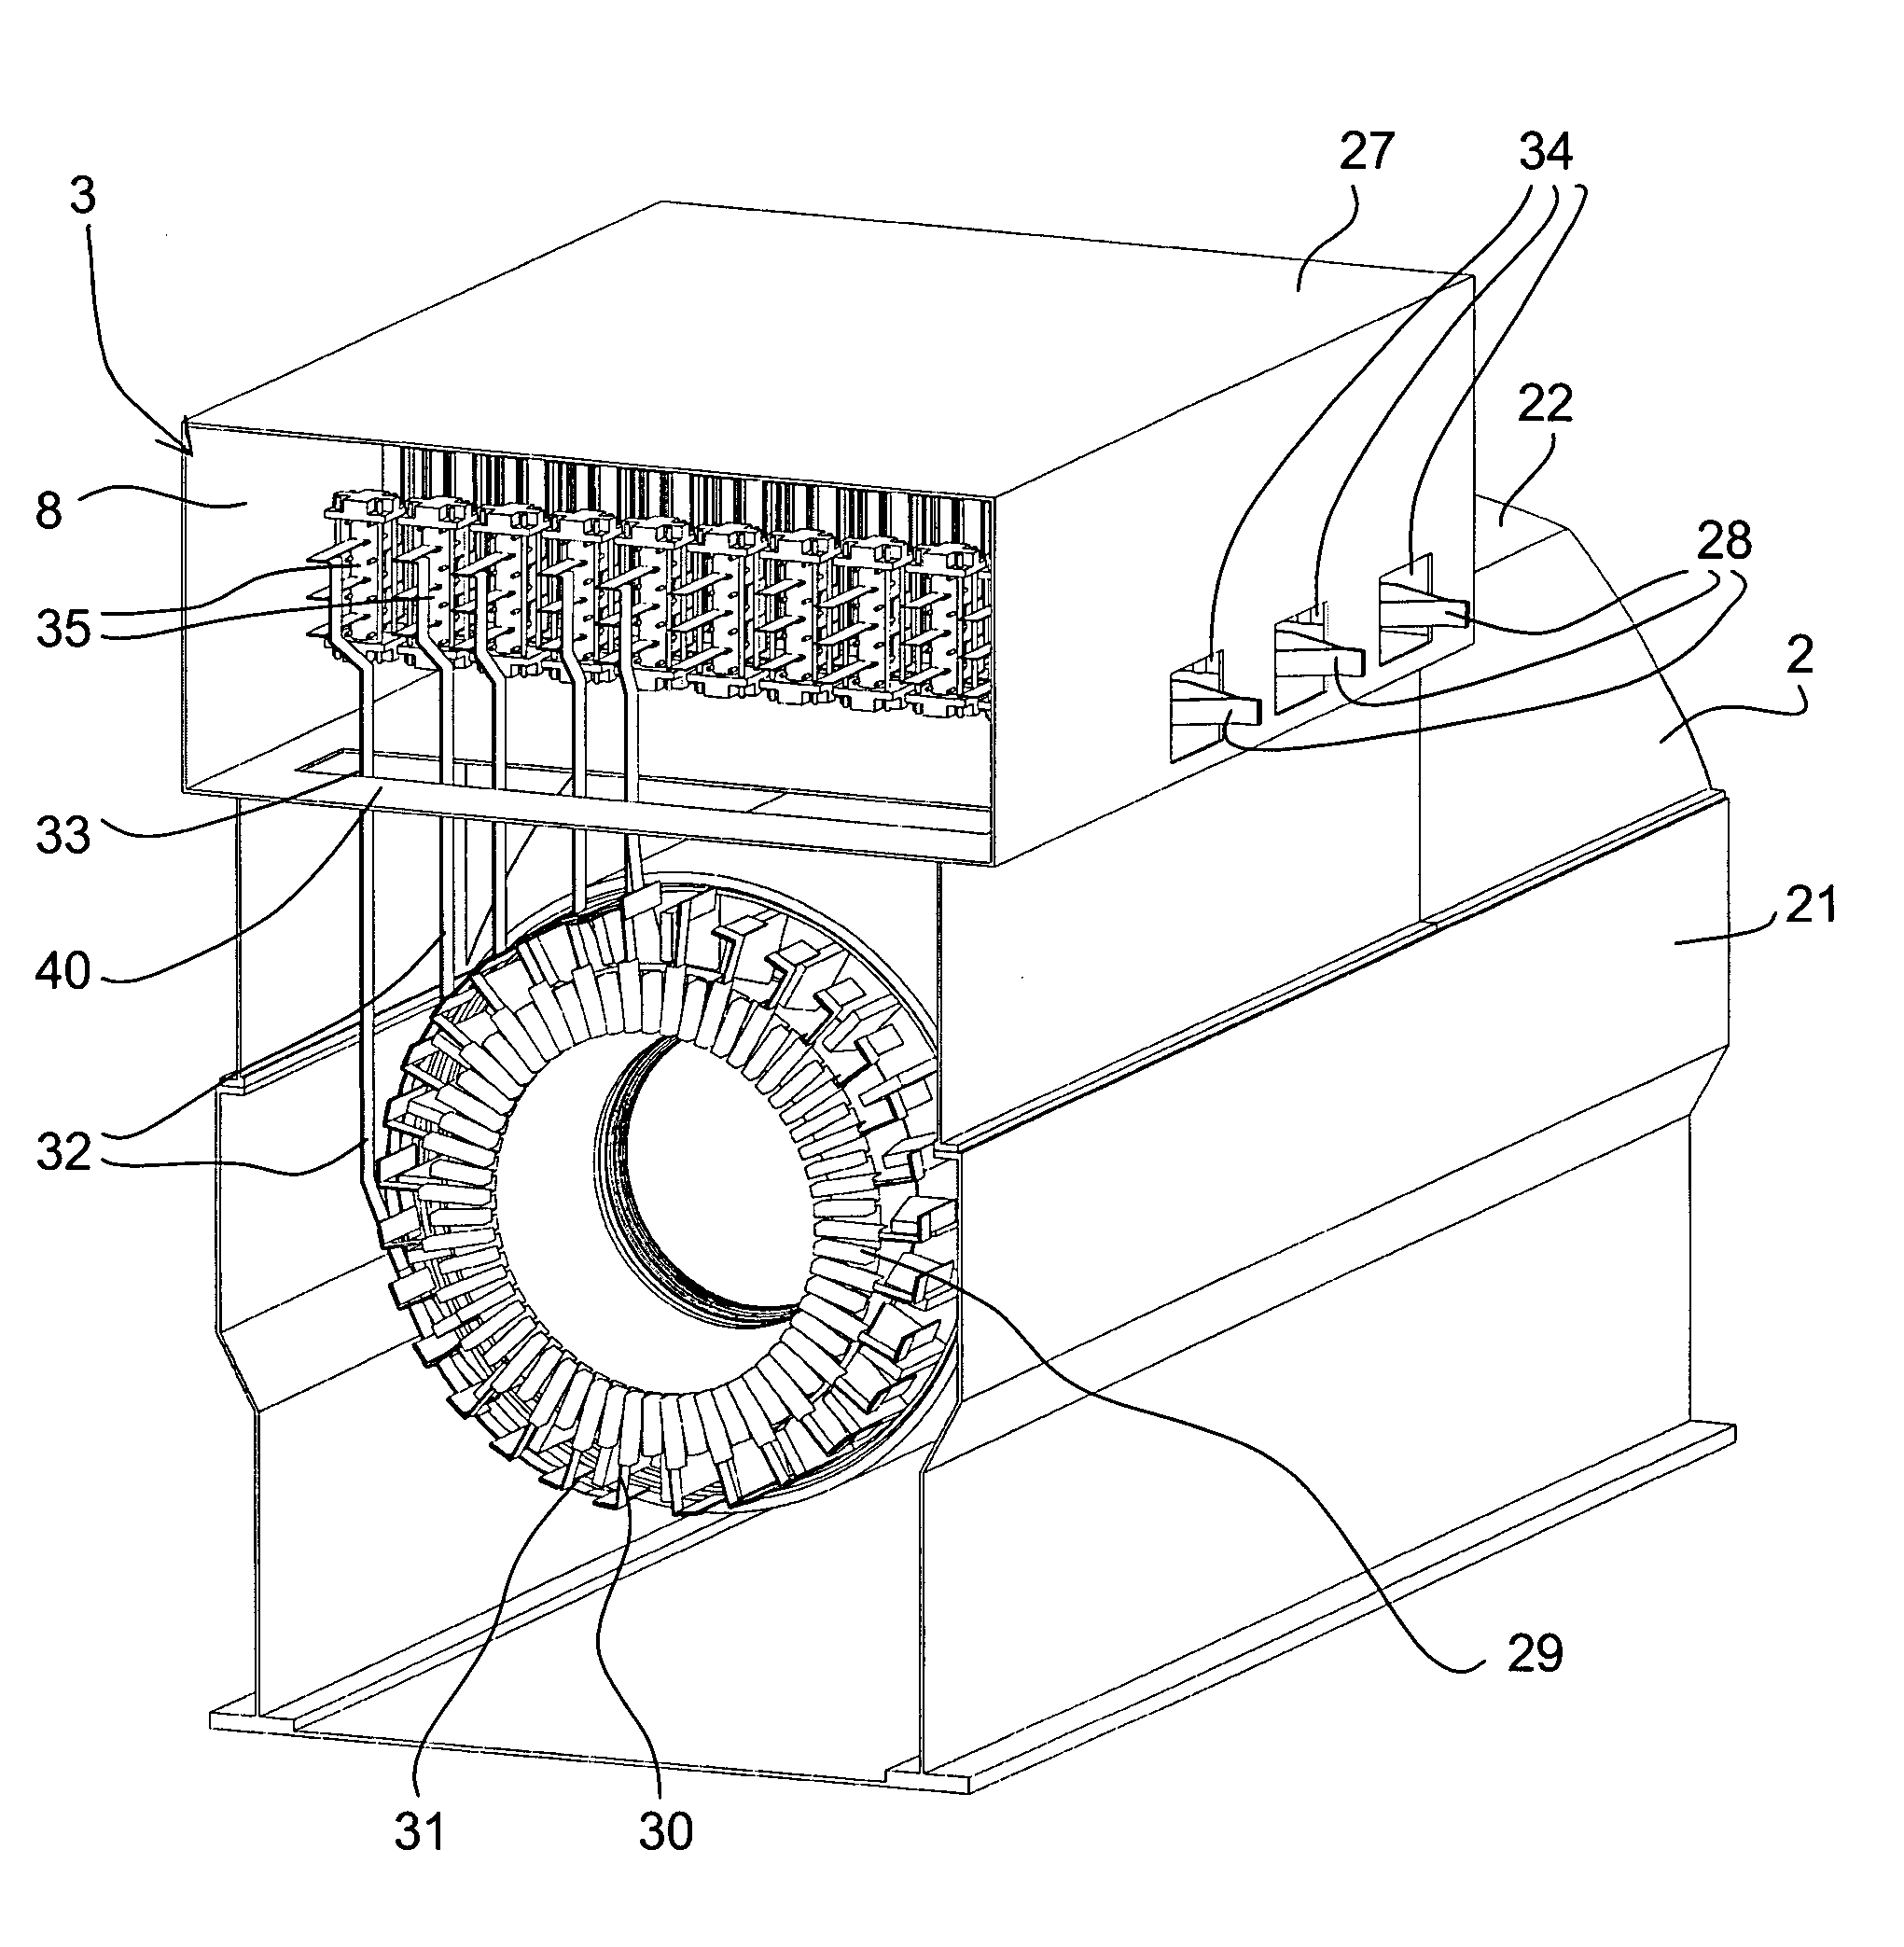 Electrical machine with electronic power unit for conversion